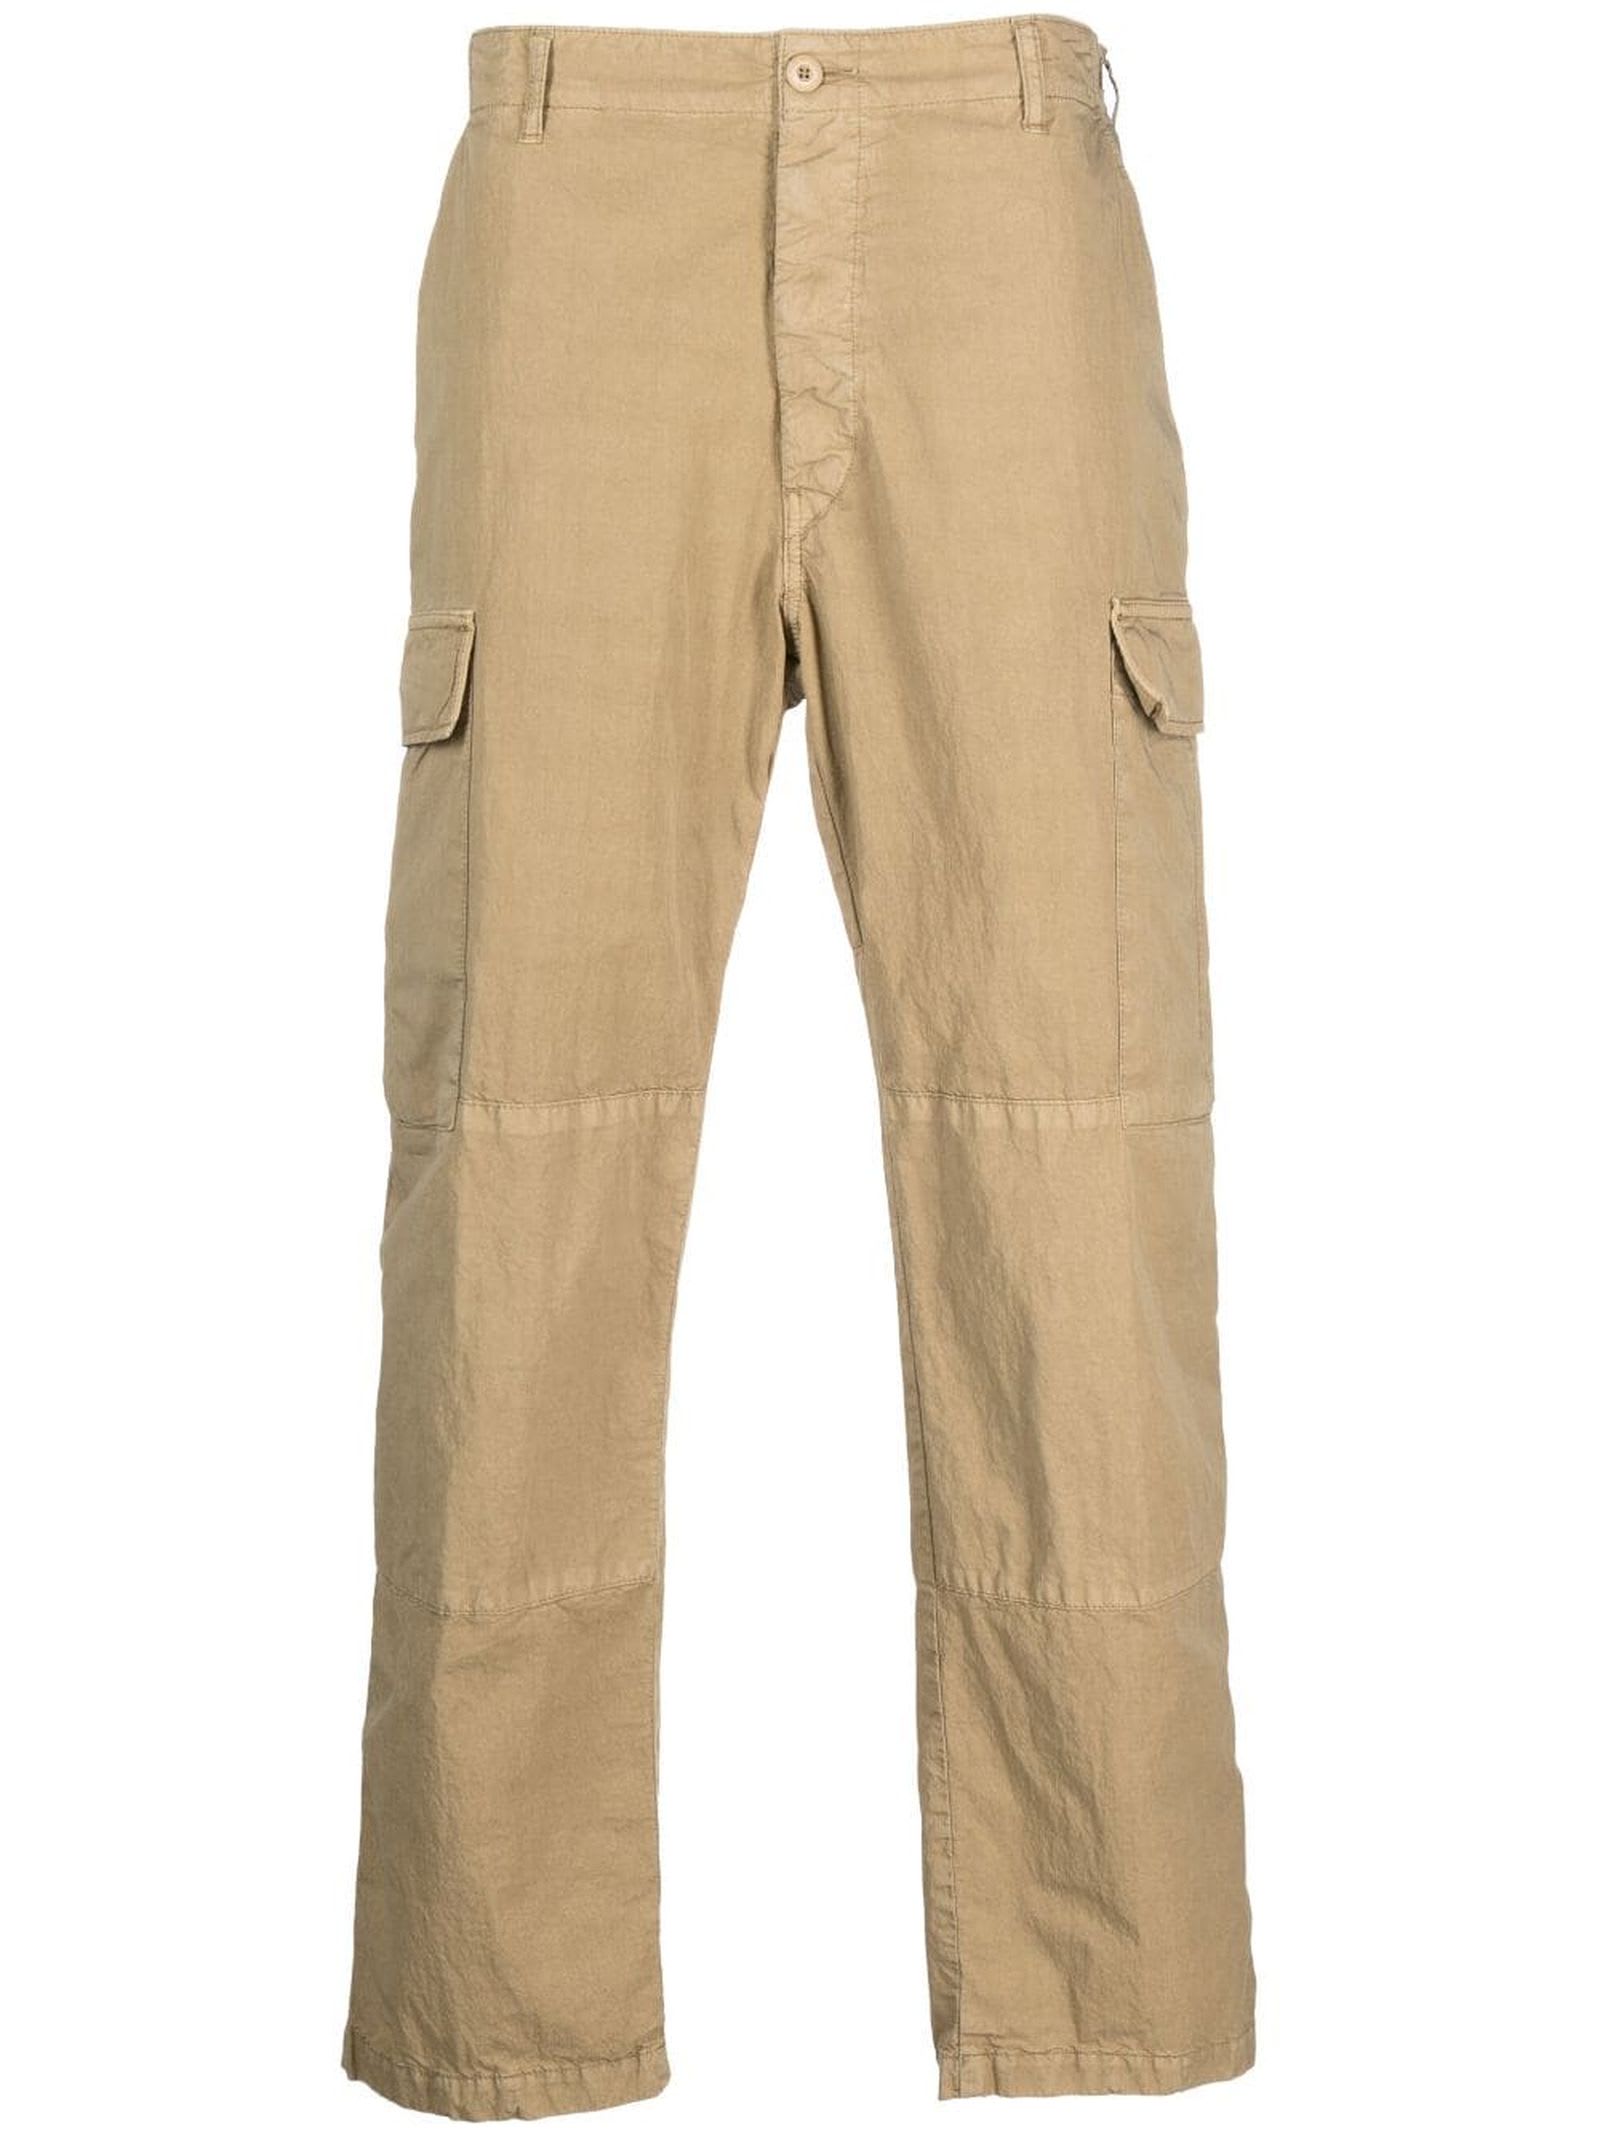 PRESIDENT'S SAND BEIGE COTTON BLEND CARGO TROUSERS